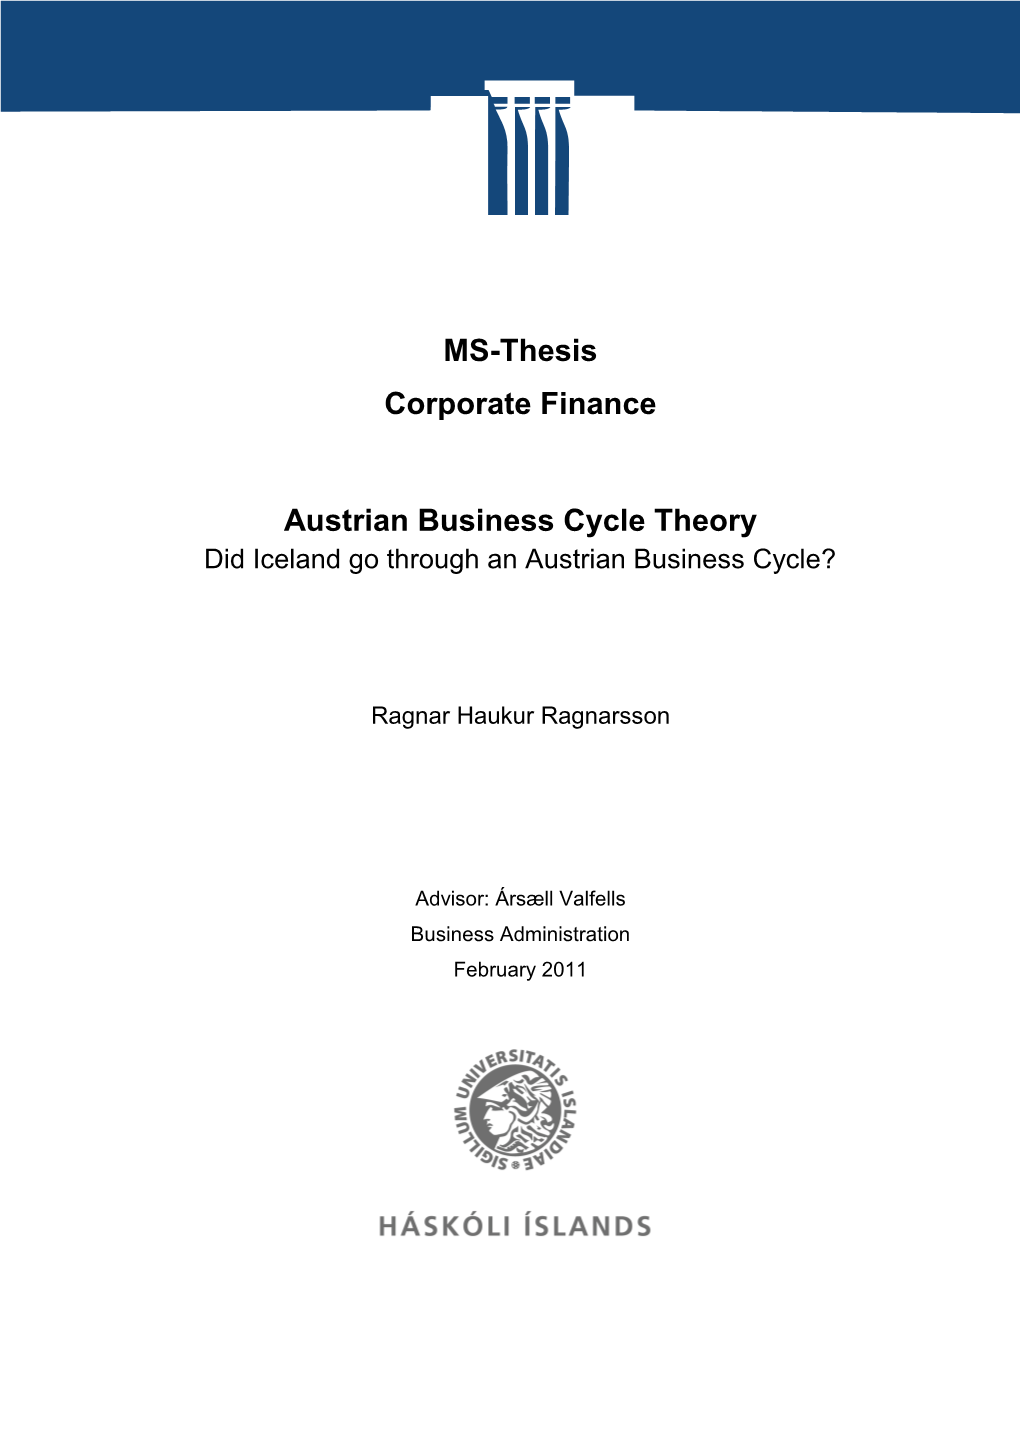 MS-Thesis Corporate Finance Austrian Business Cycle Theory